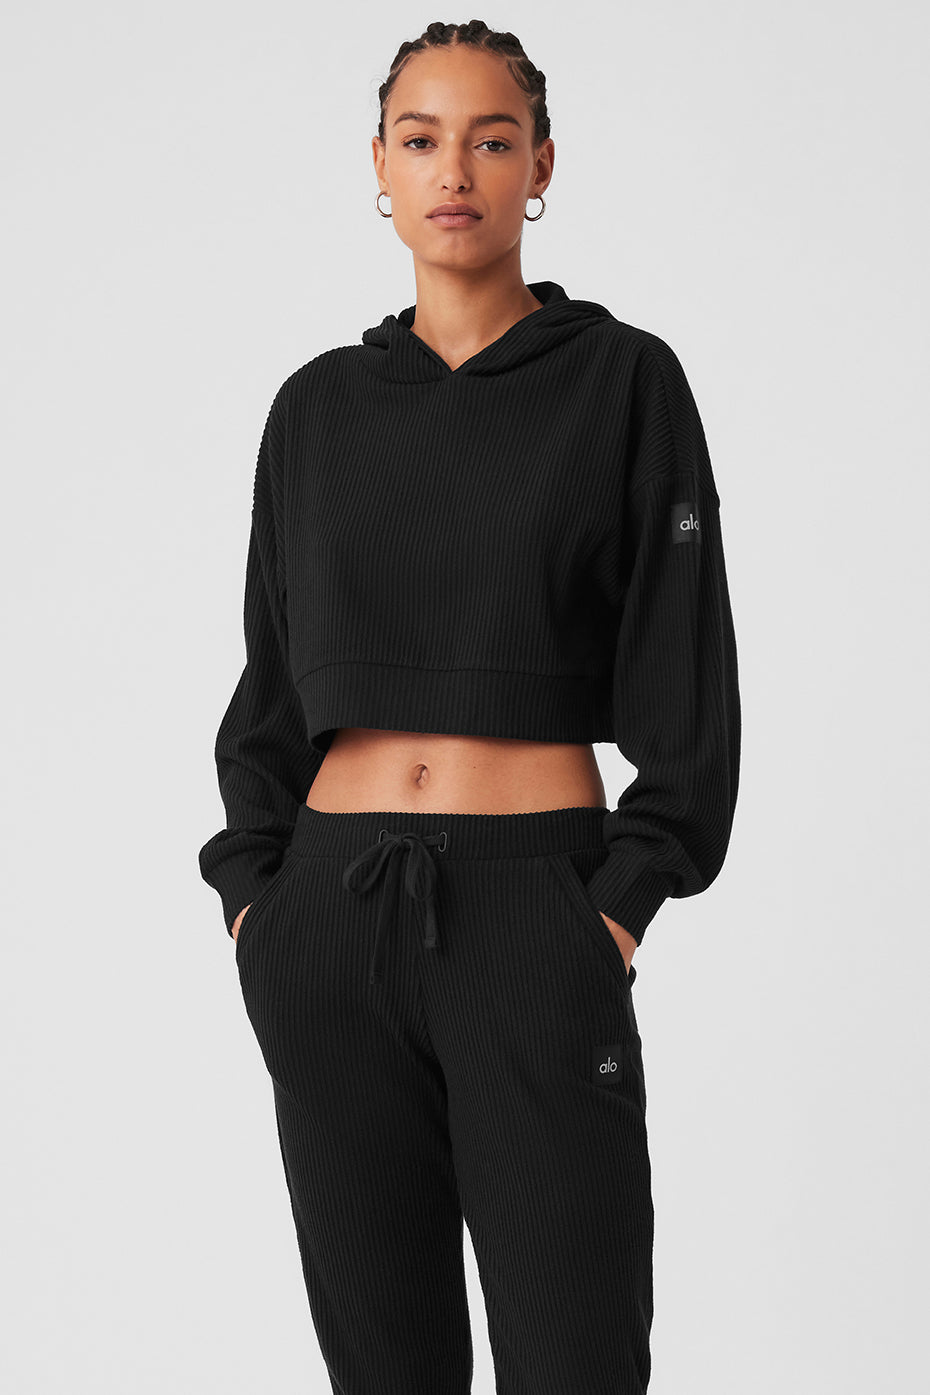 Alo Yoga  Cropped Shrug It Off Hoodie in Black, Size: Small - ShopStyle